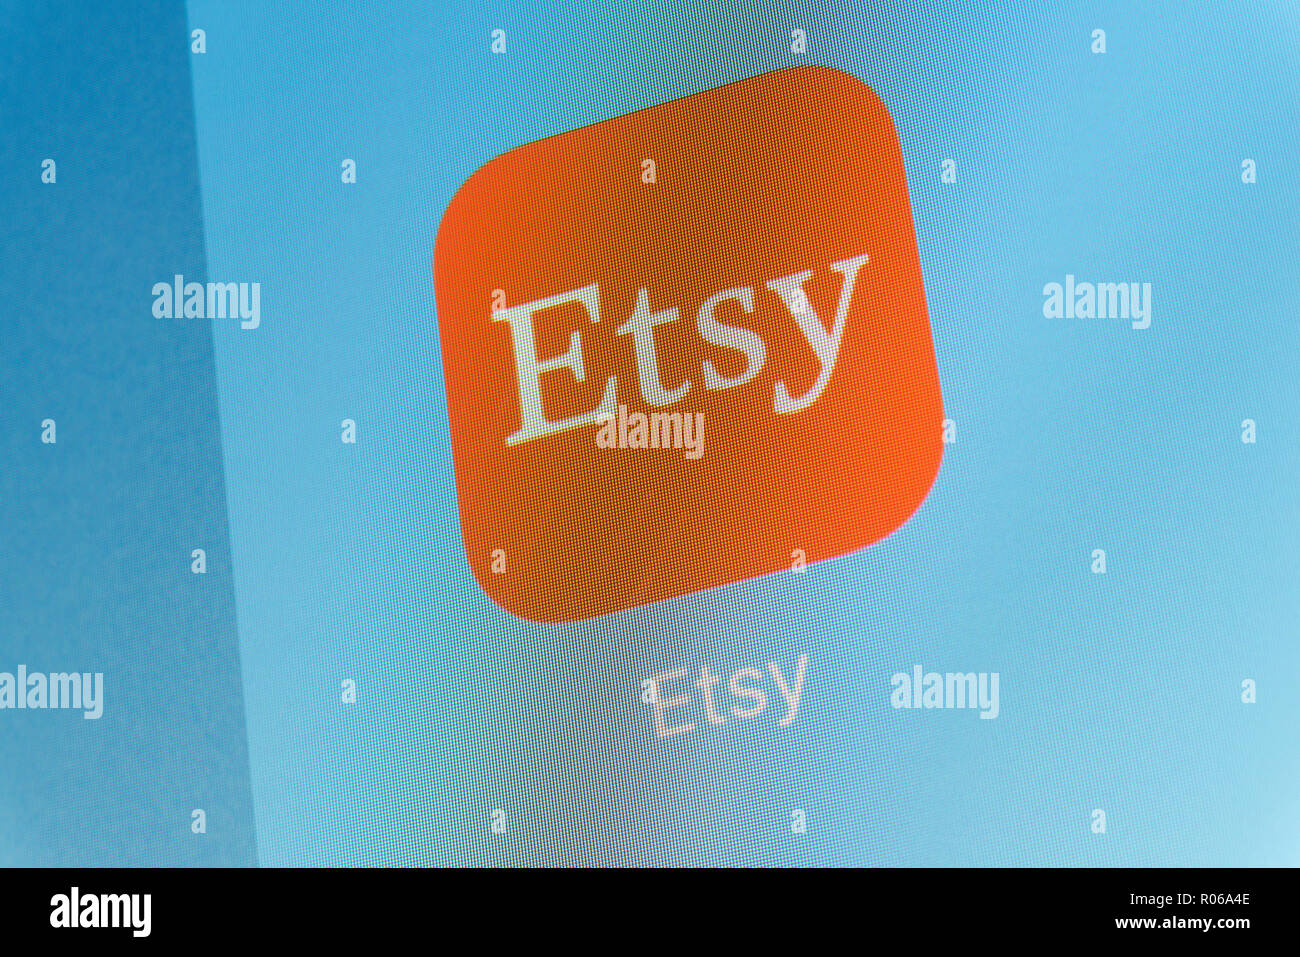 etsy app high resolution stock photography and images alamy https www alamy com etsy app on cellphone screen image223874462 html